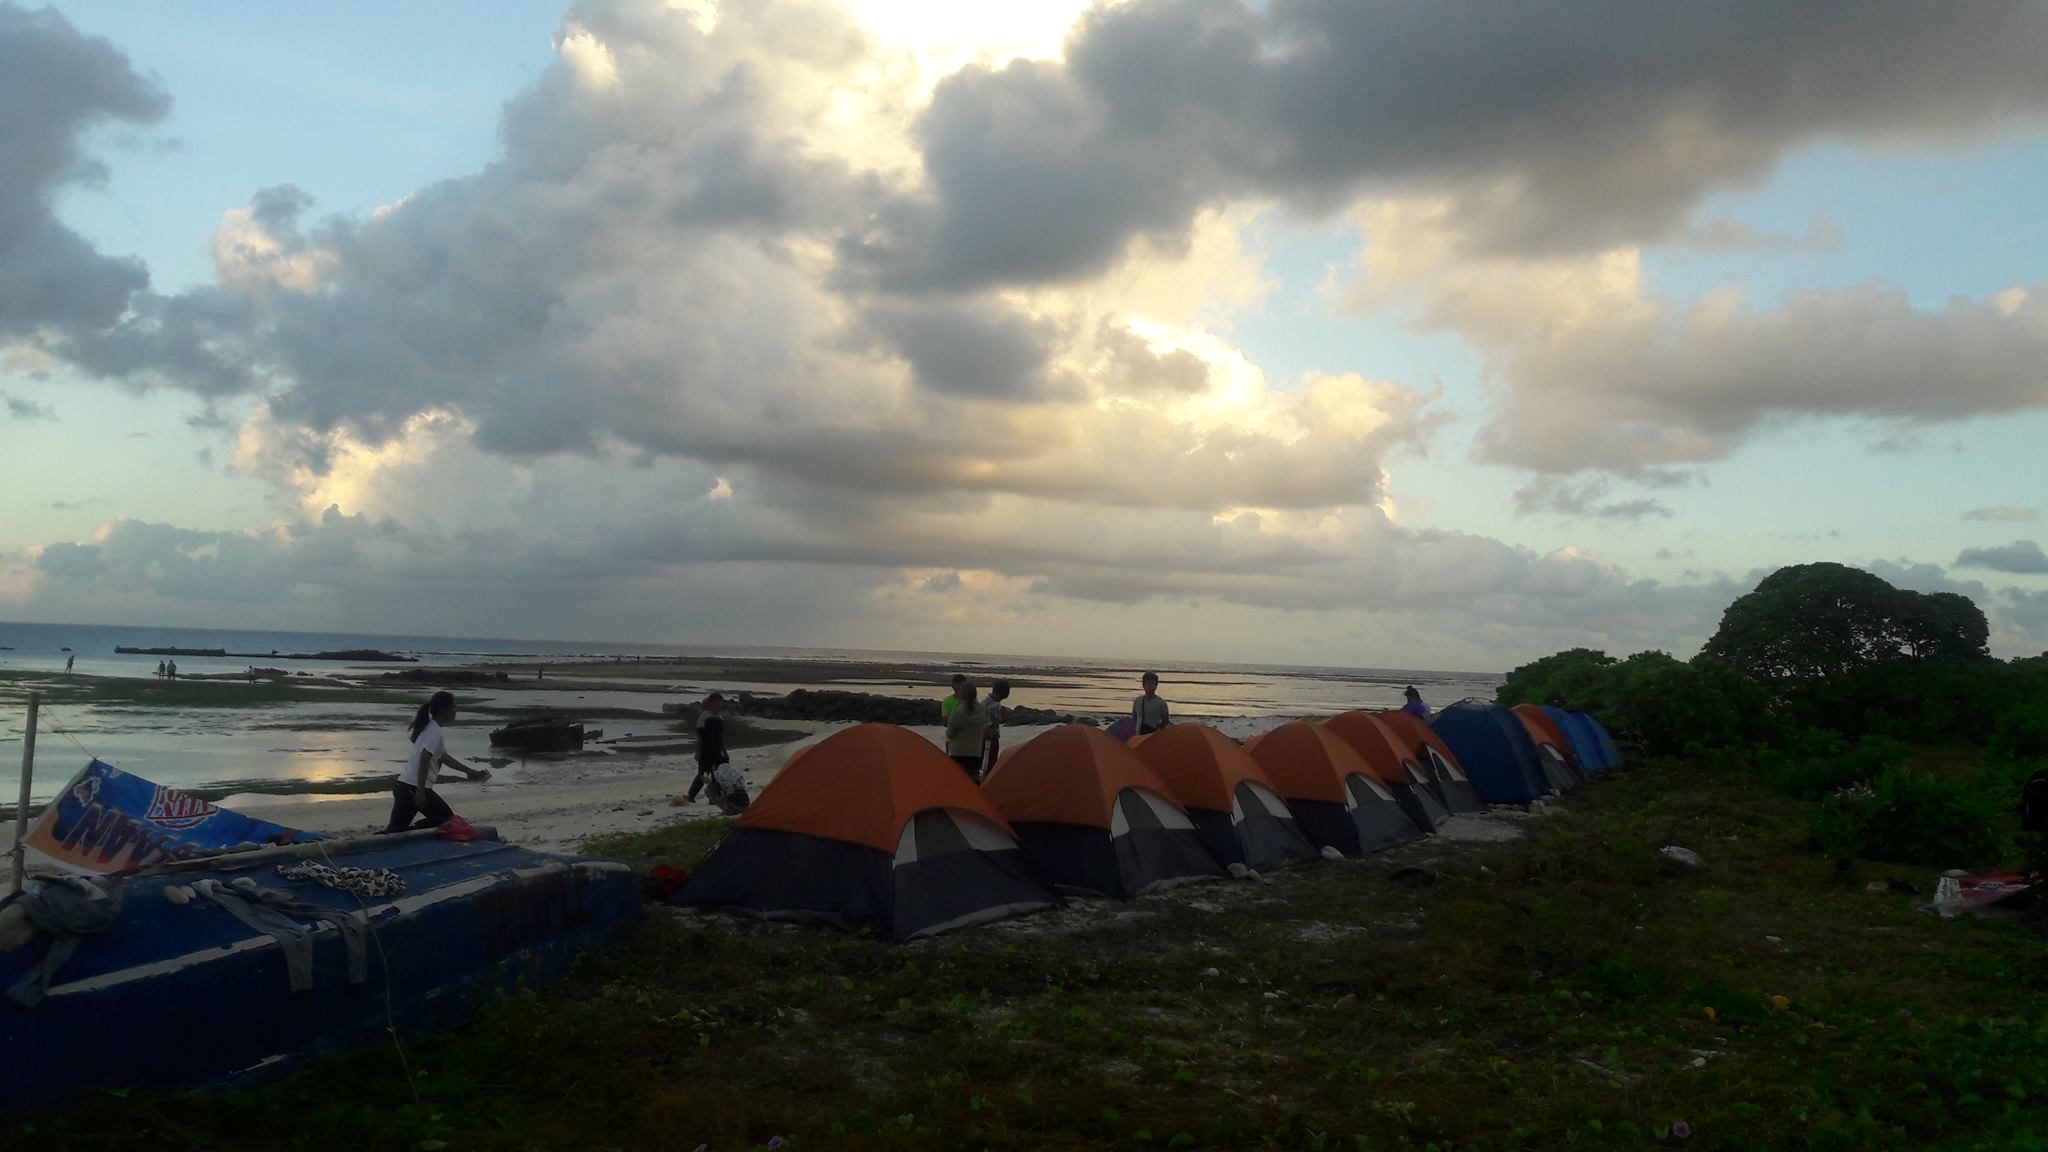 Defying China, Filipino youth camp out on disputed island